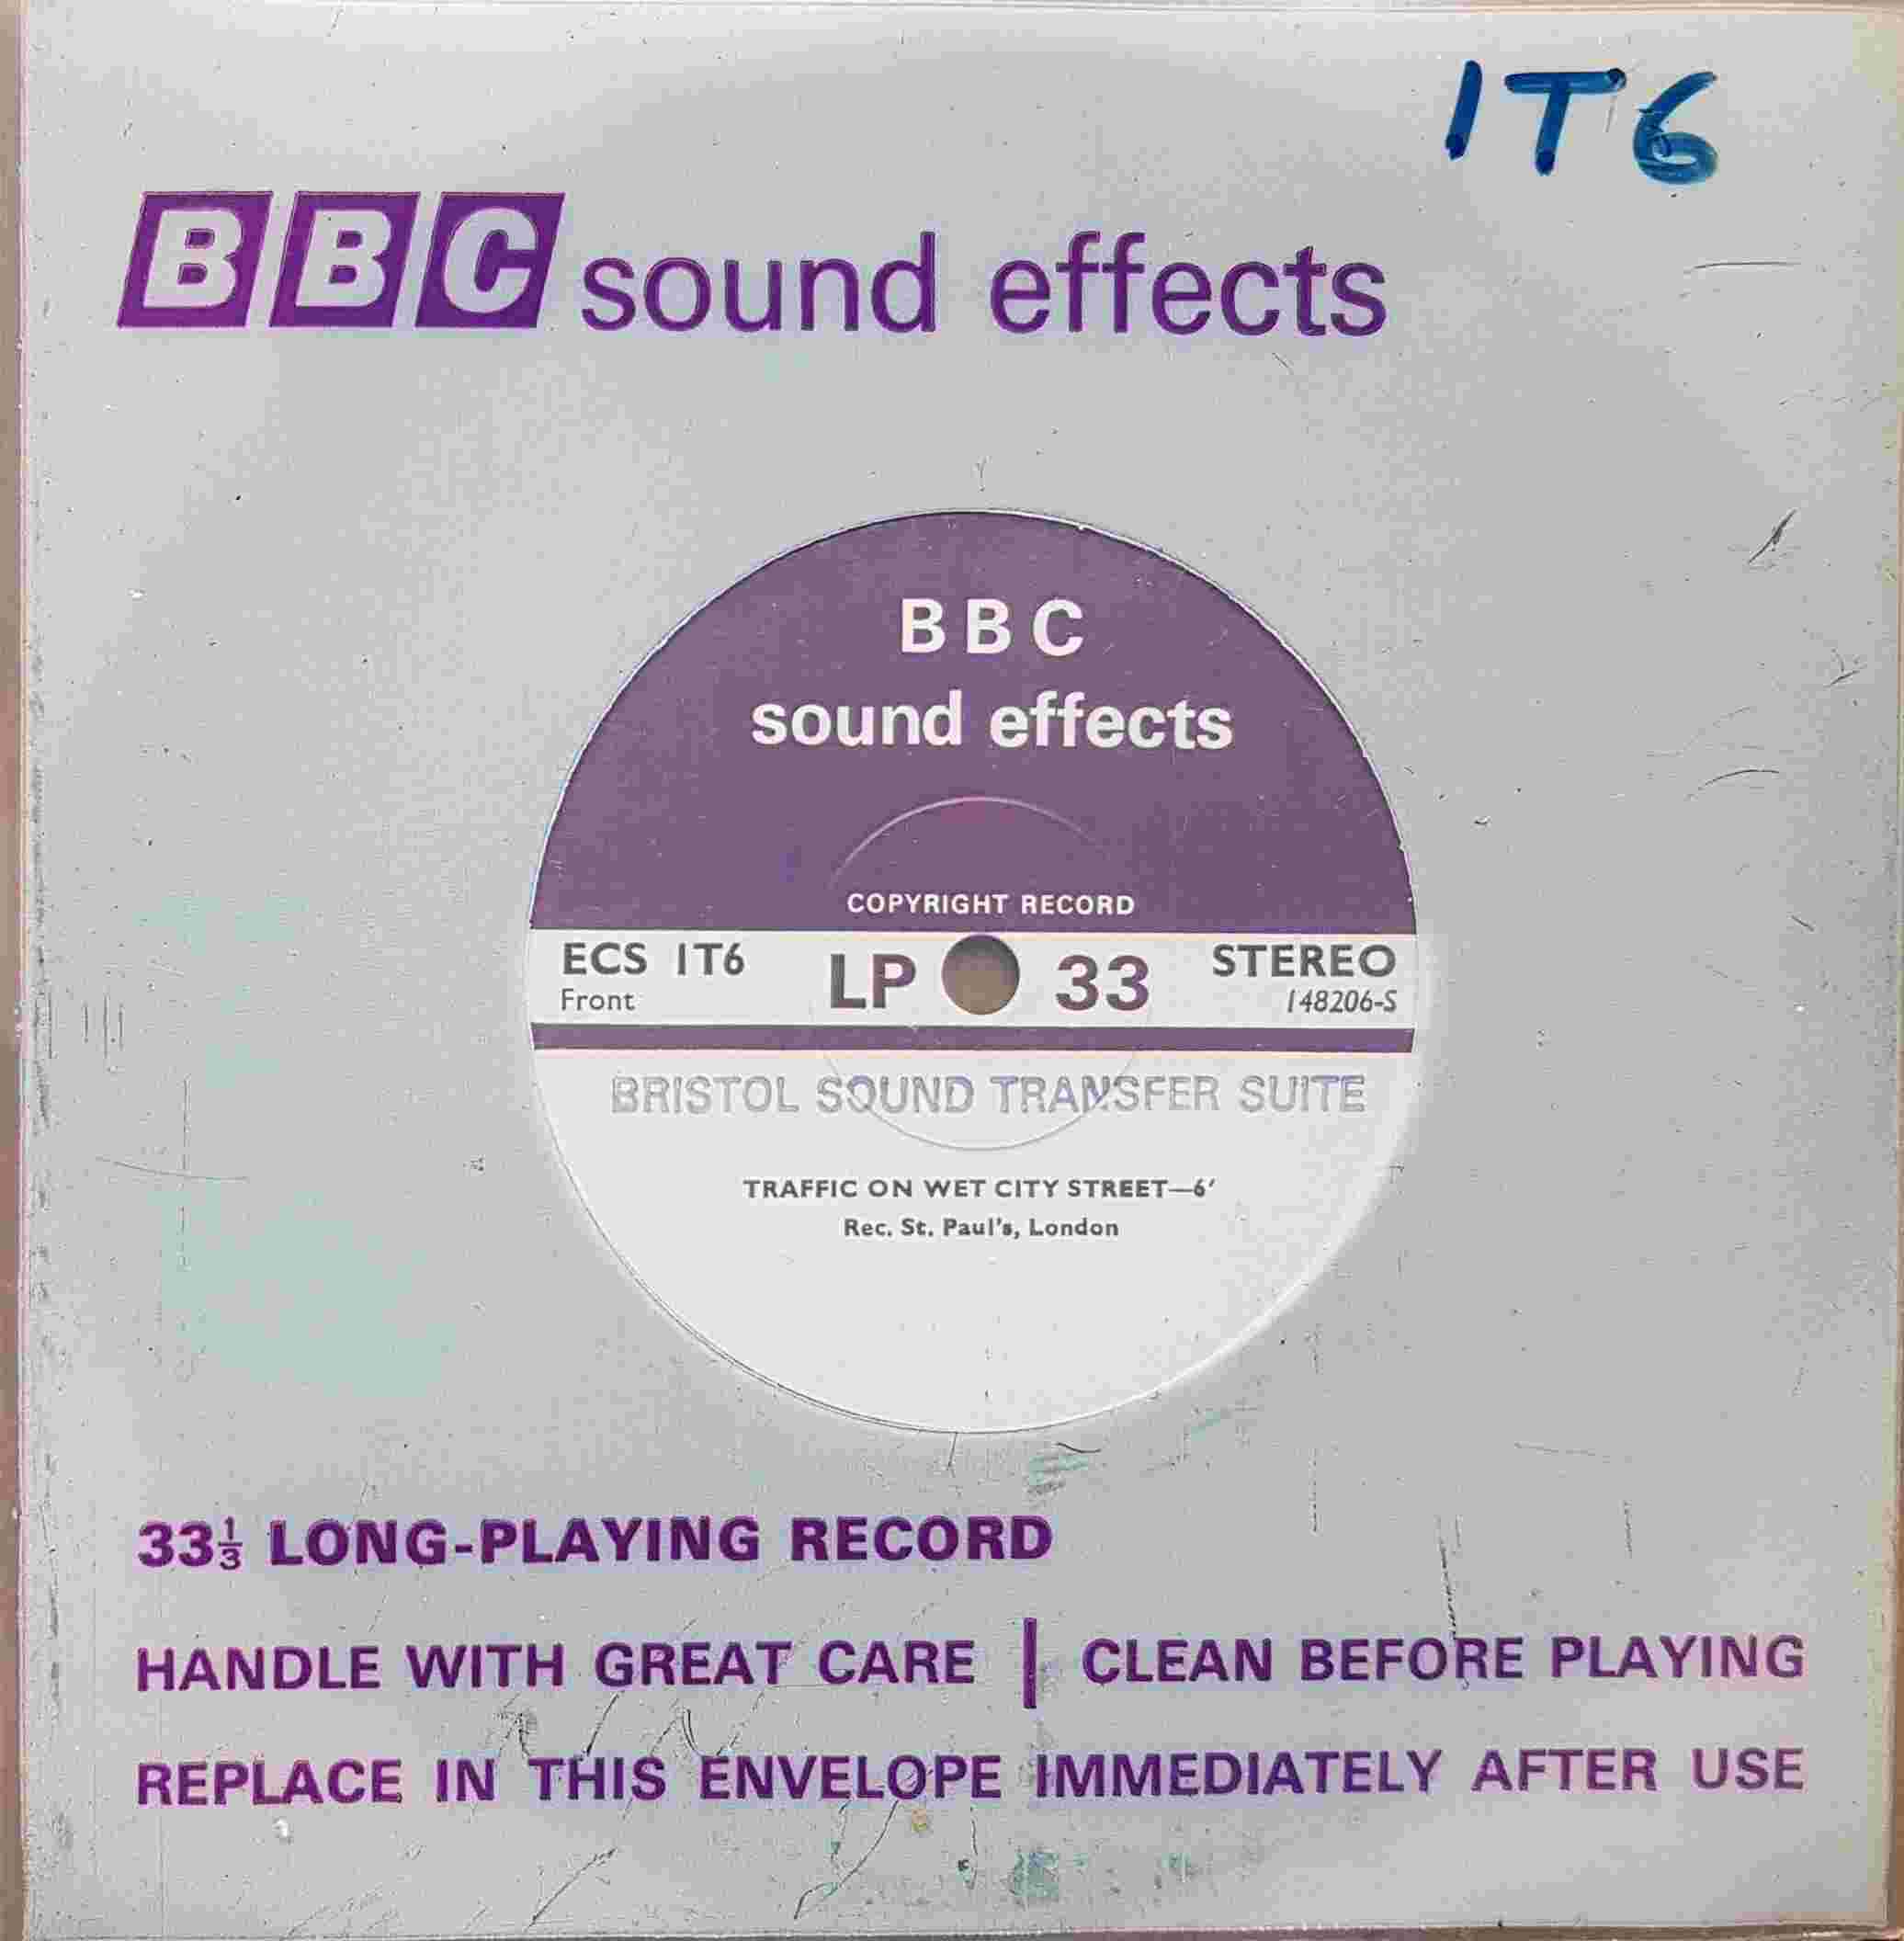 Picture of ECS 1T6 Traffic on wet city street by artist Not registered from the BBC records and Tapes library